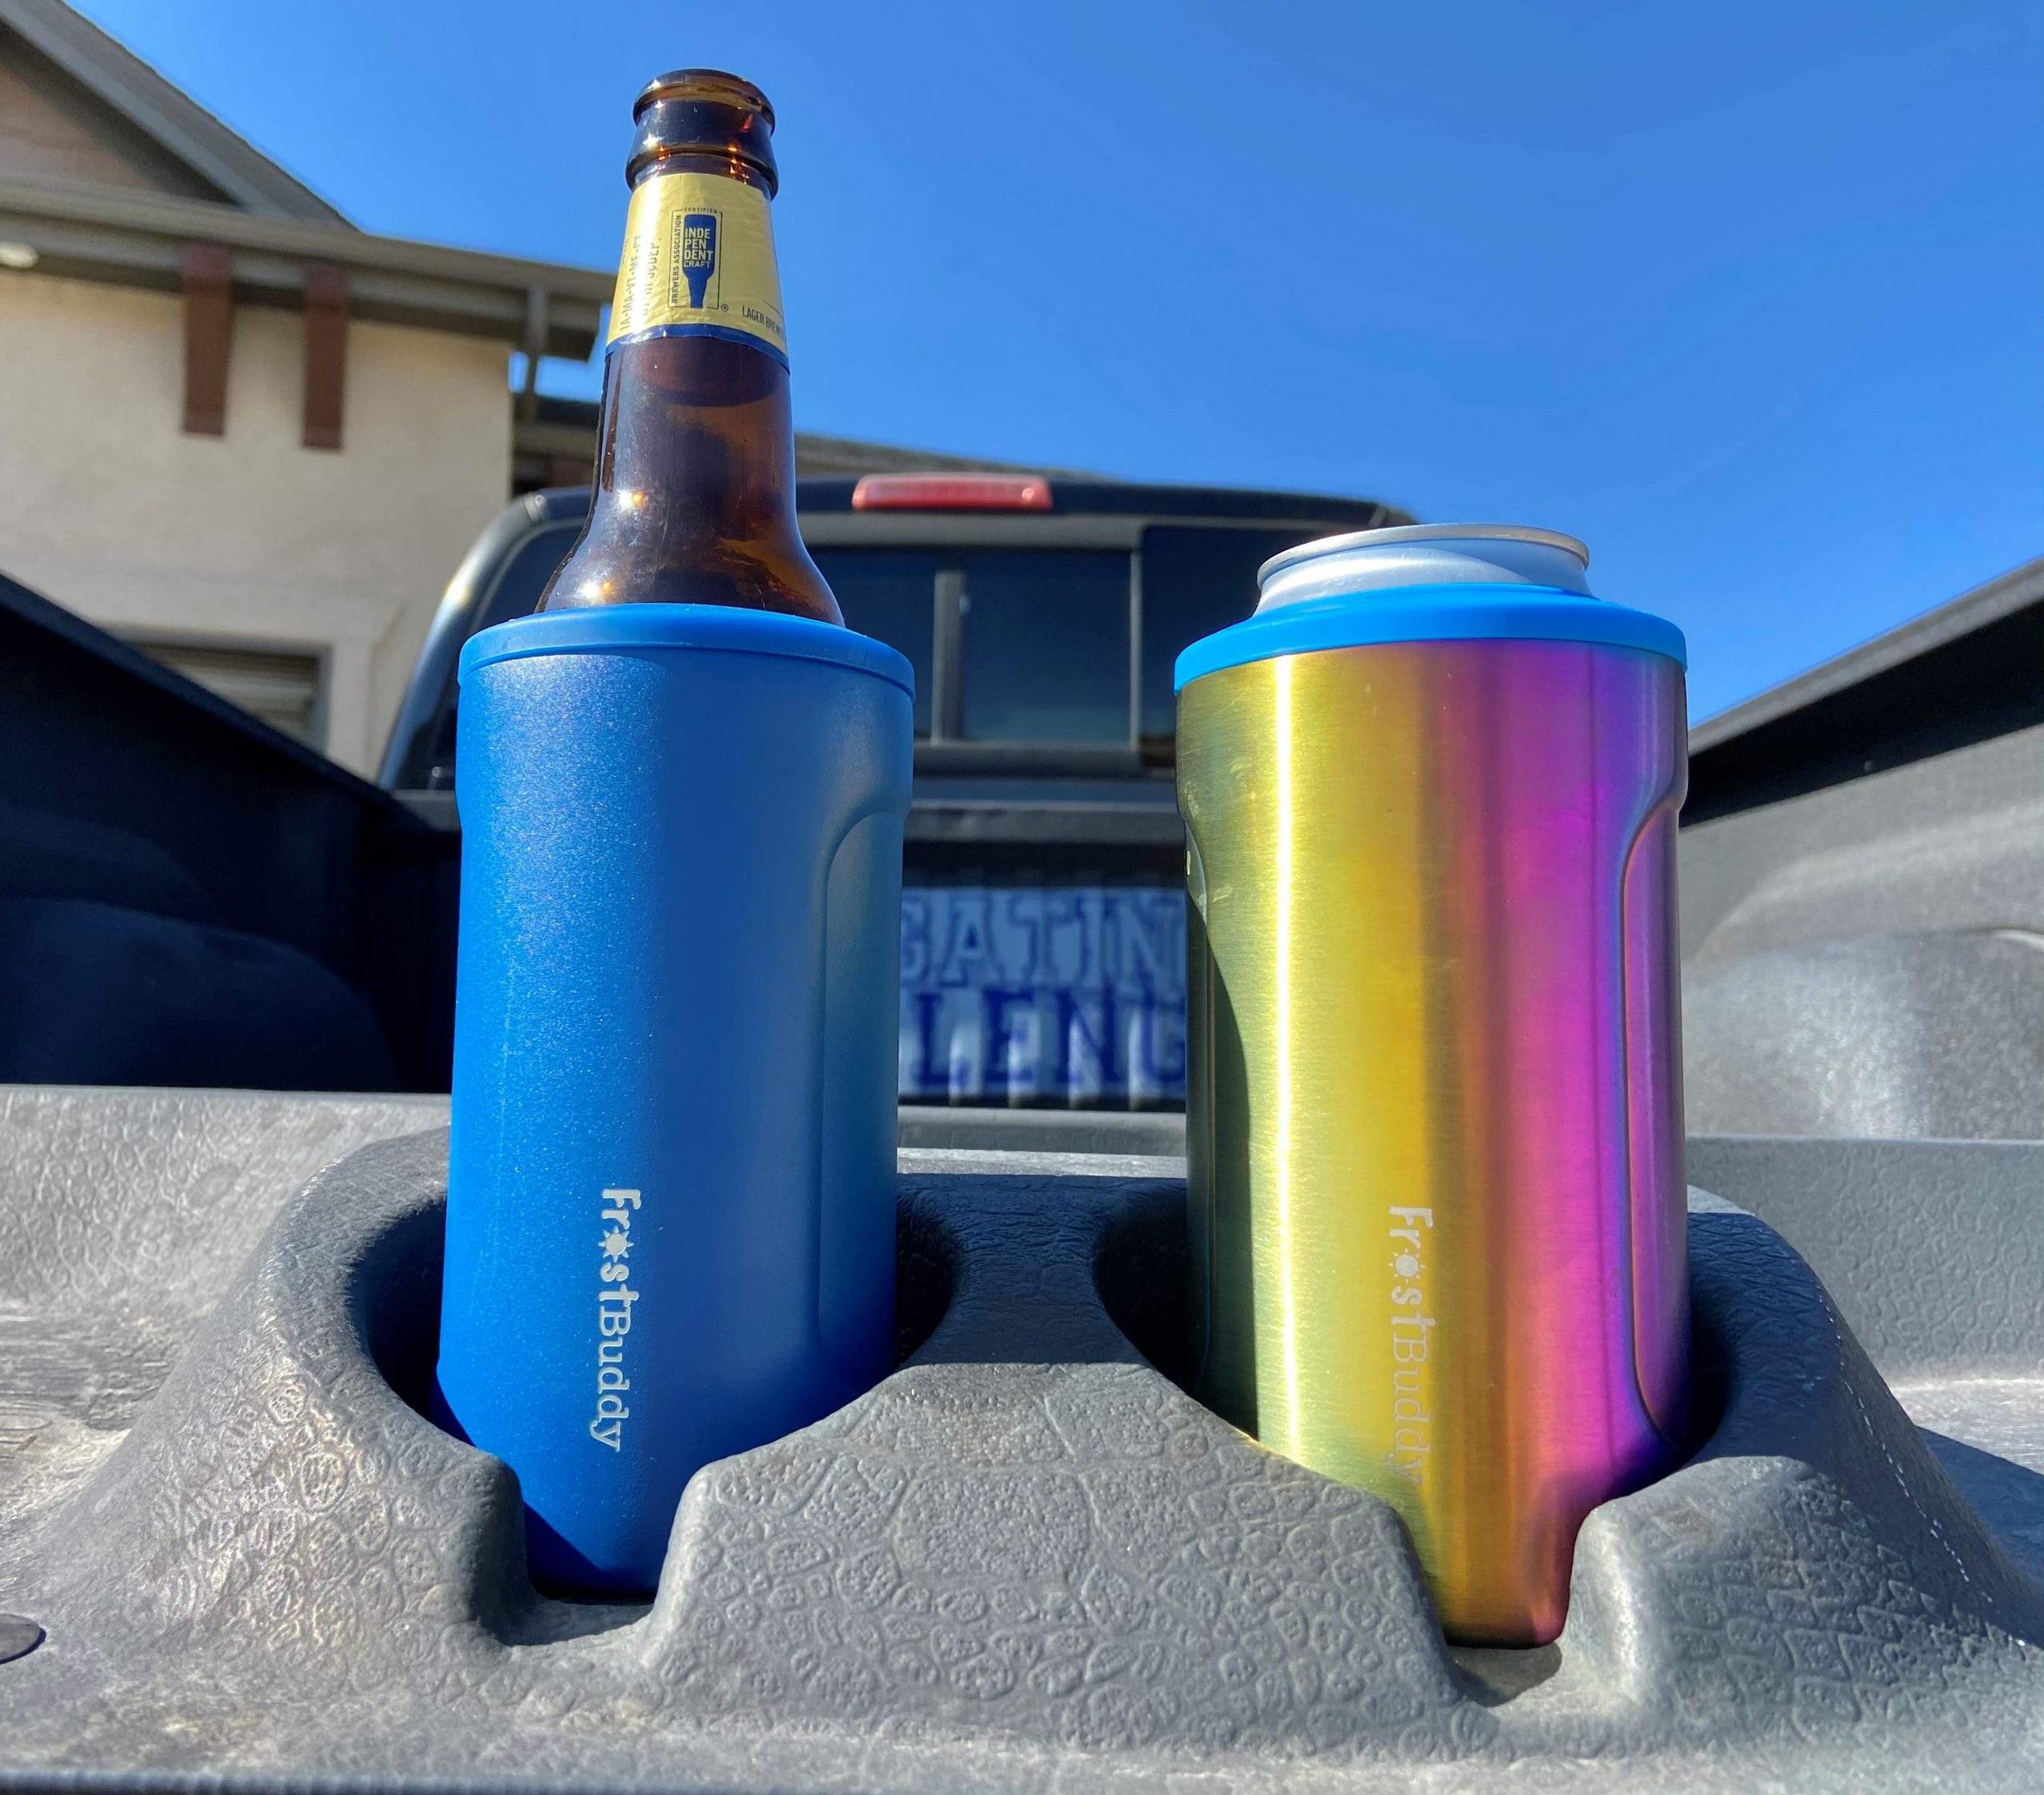 Frost Buddy Koozie Review - Tailgating Challenge